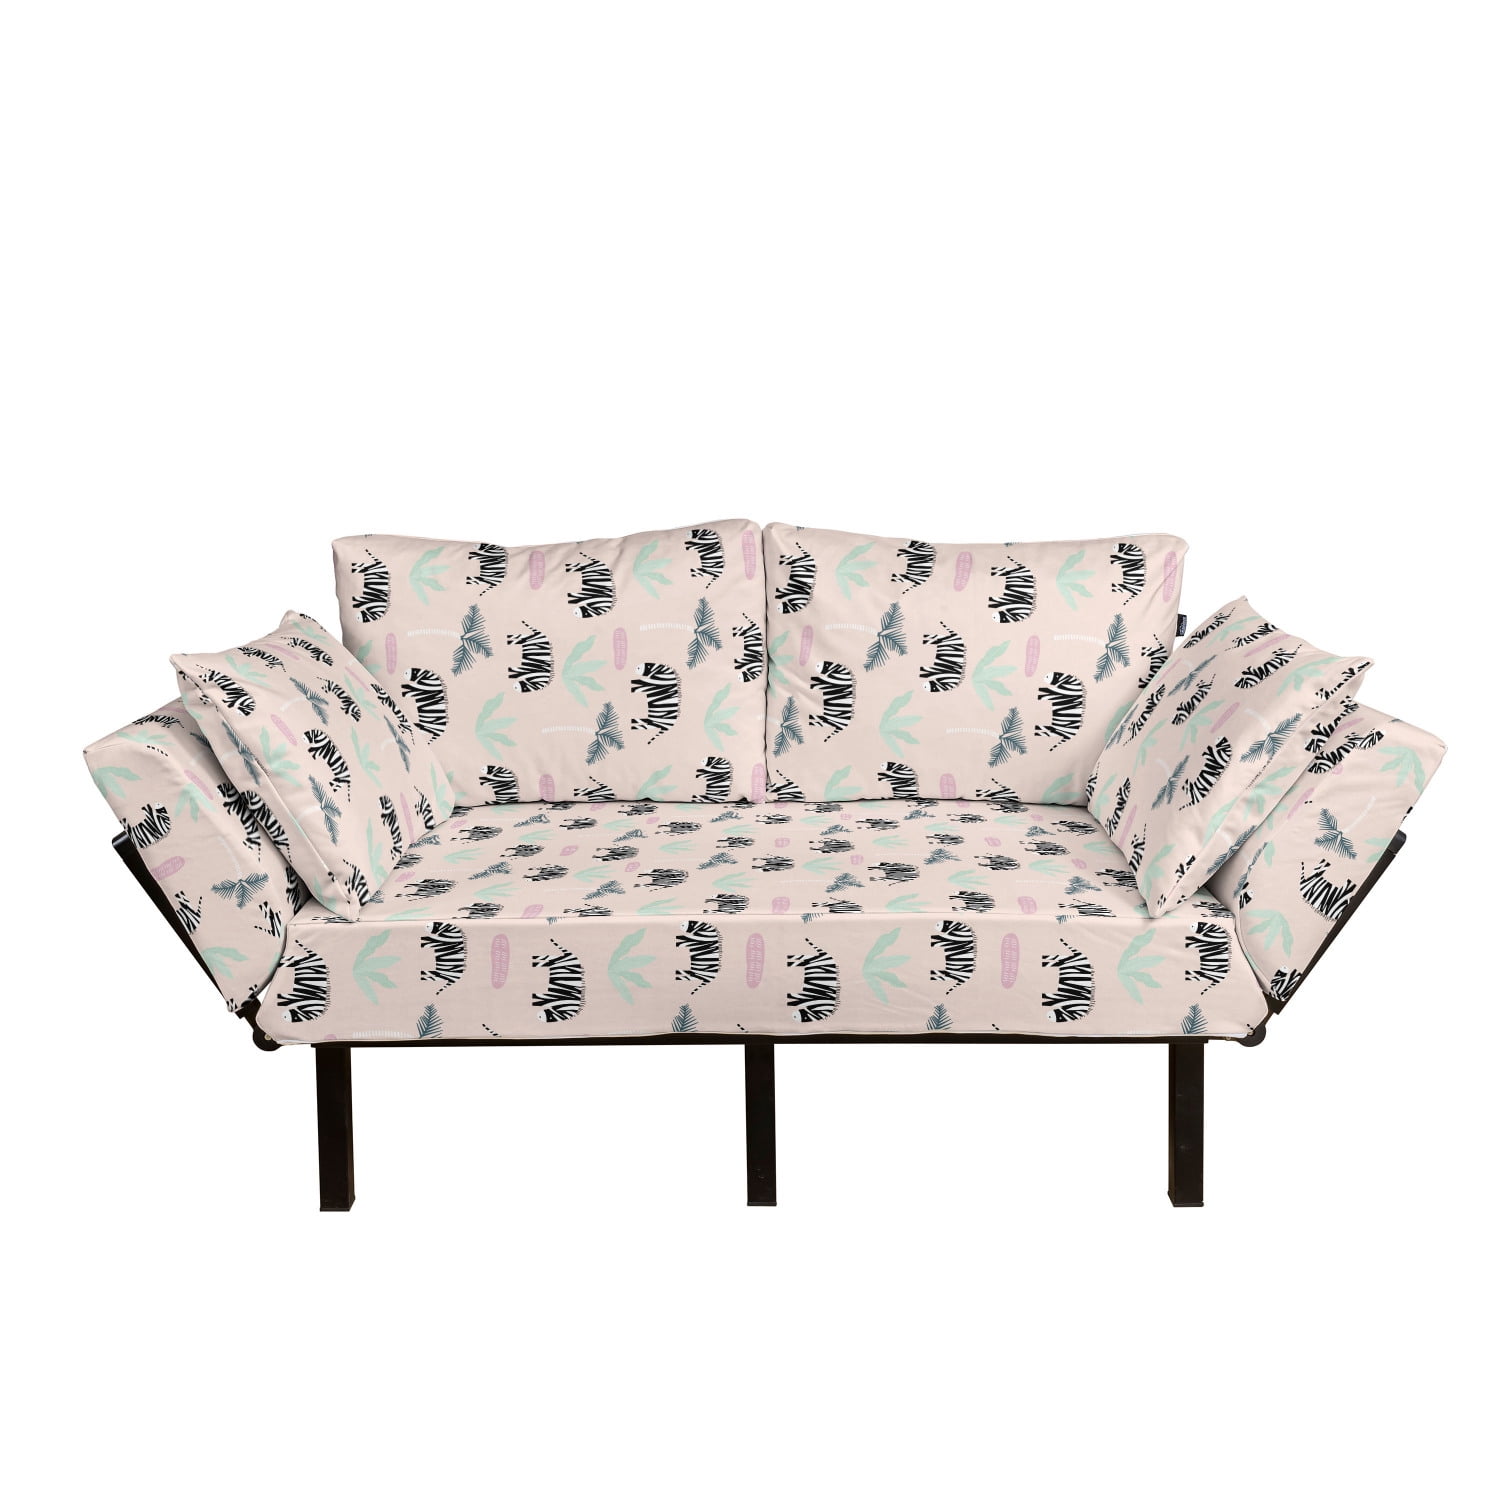 Daybed with Metal Frame Upholstered Sofa for Living Dorm Loveseat Abstract Funny Pattern with Colorful Toadstools Illustration Ambesonne Mushroom Futon Couch Multicolor